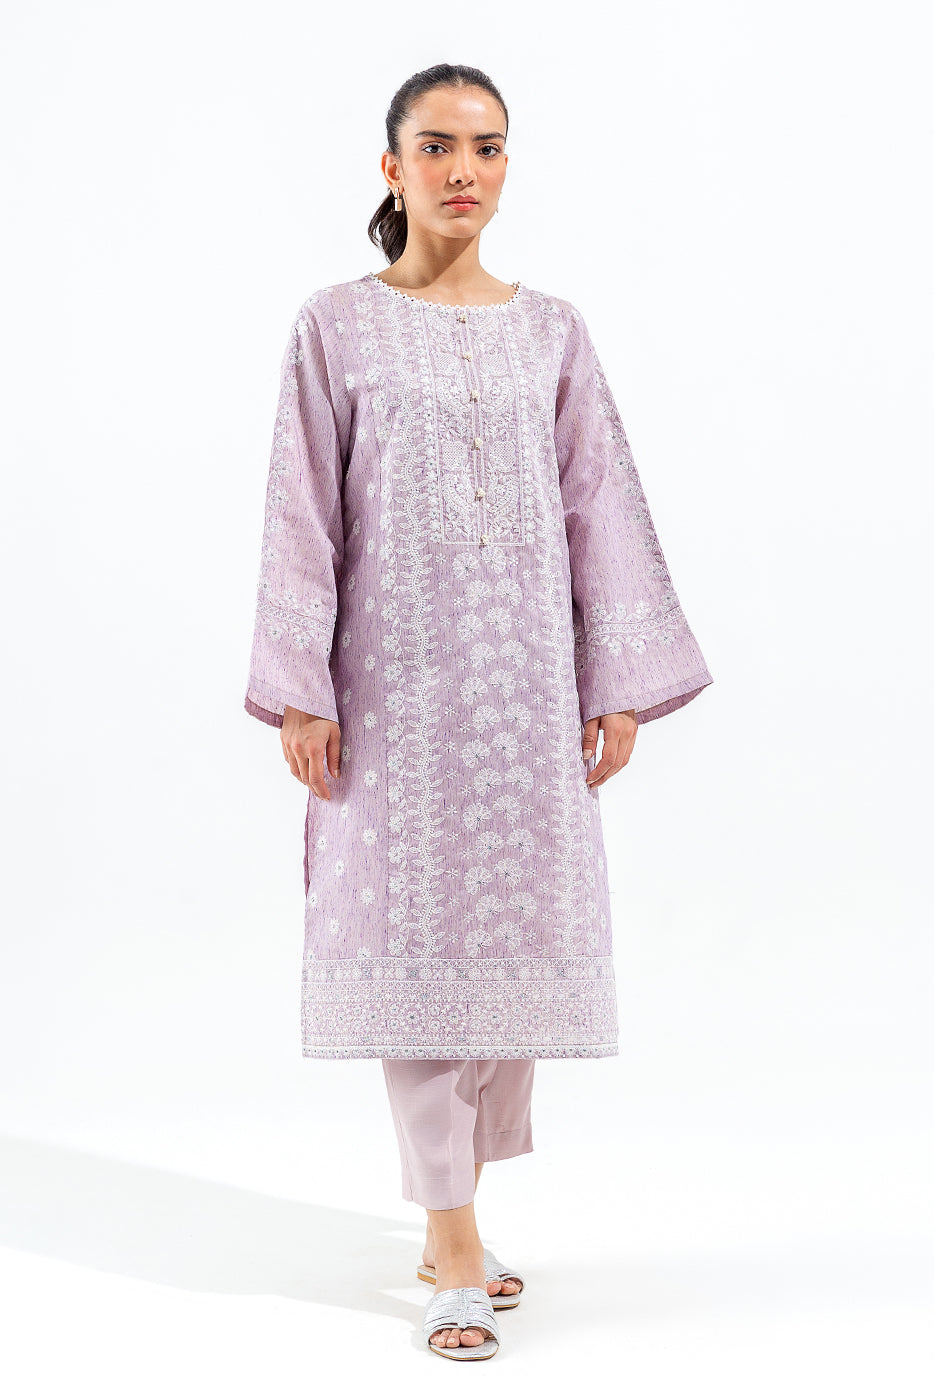 2 PIECE EMBROIDERED FANCY NEPS SUIT (LUXURY PRET) - BEECHTREE